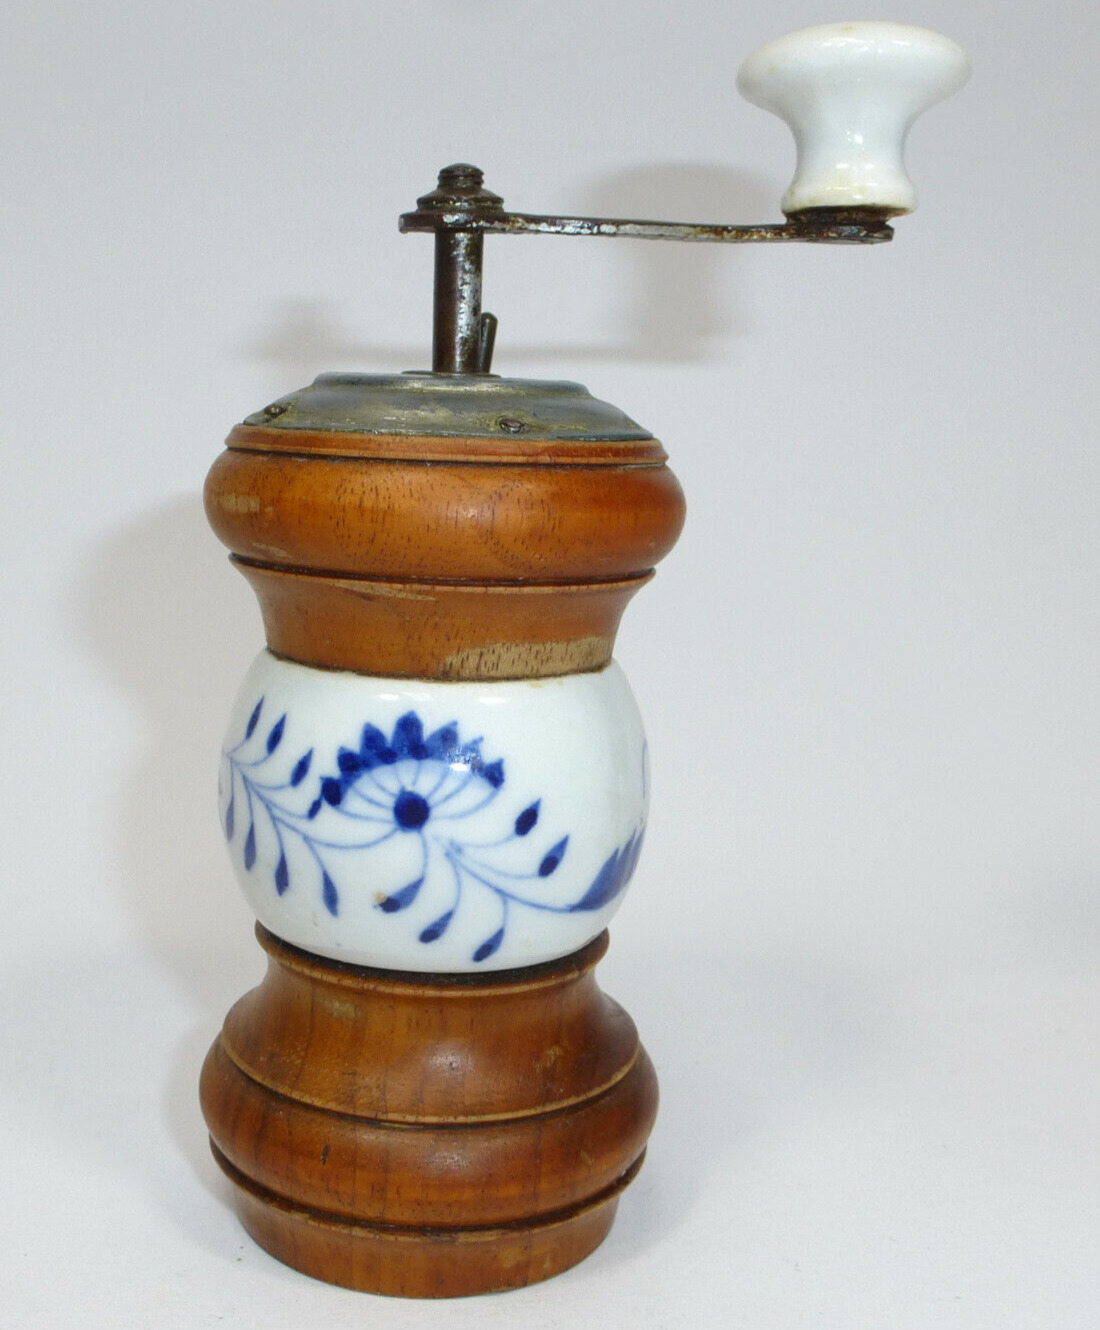 Pepper Mill about 1900 ko-6632